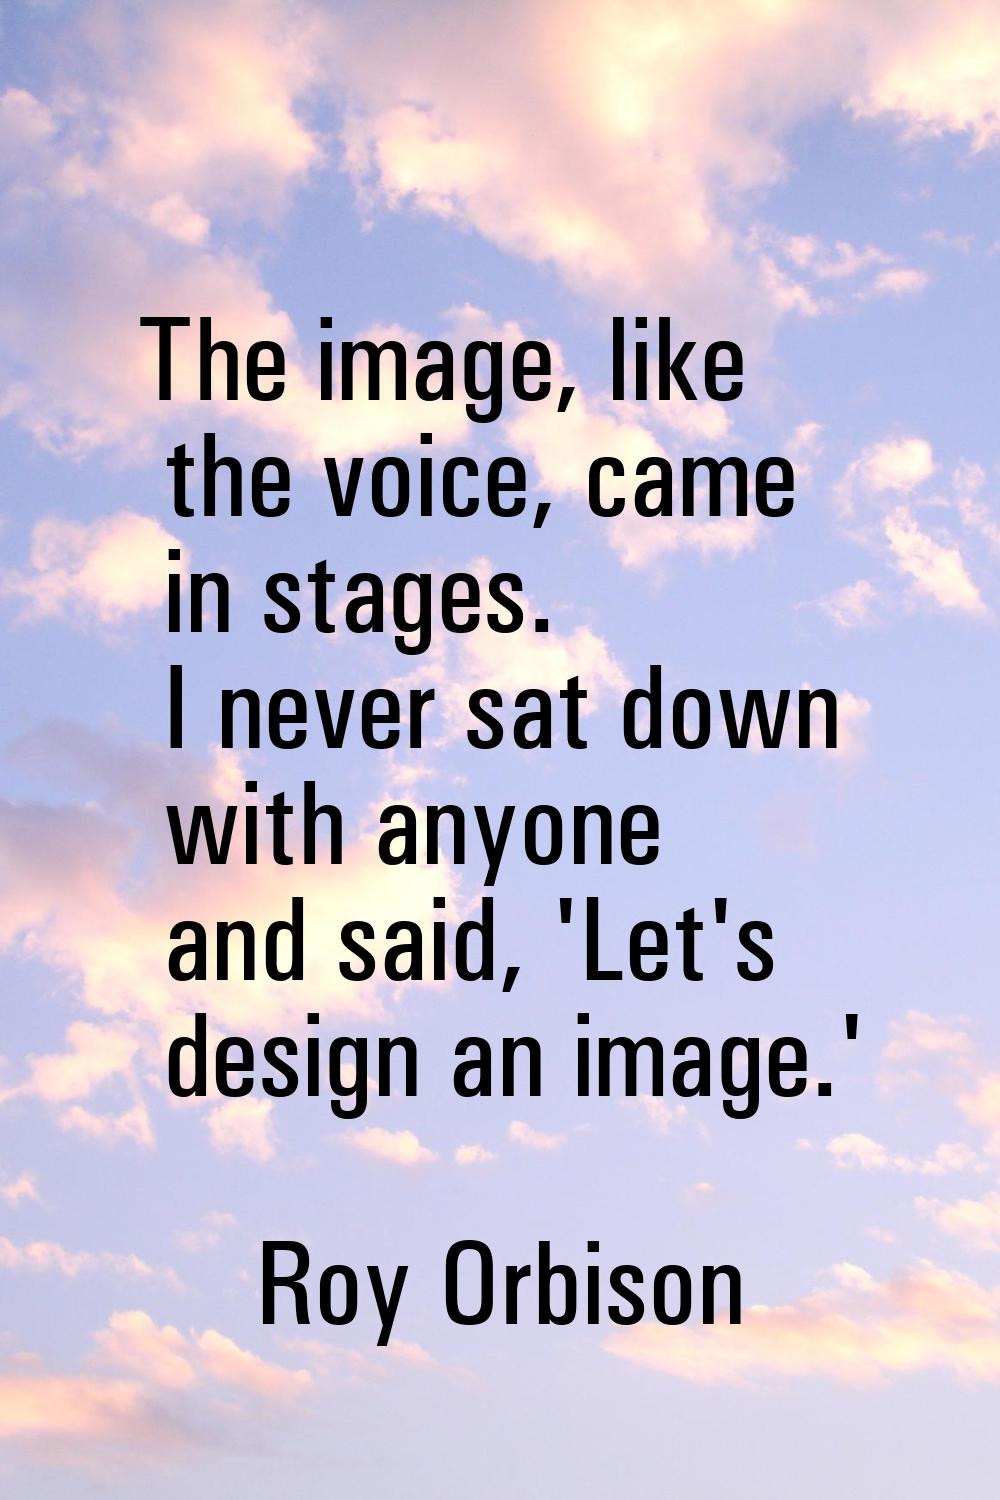 The image, like the voice, came in stages. I never sat down with anyone and said, 'Let's design an 